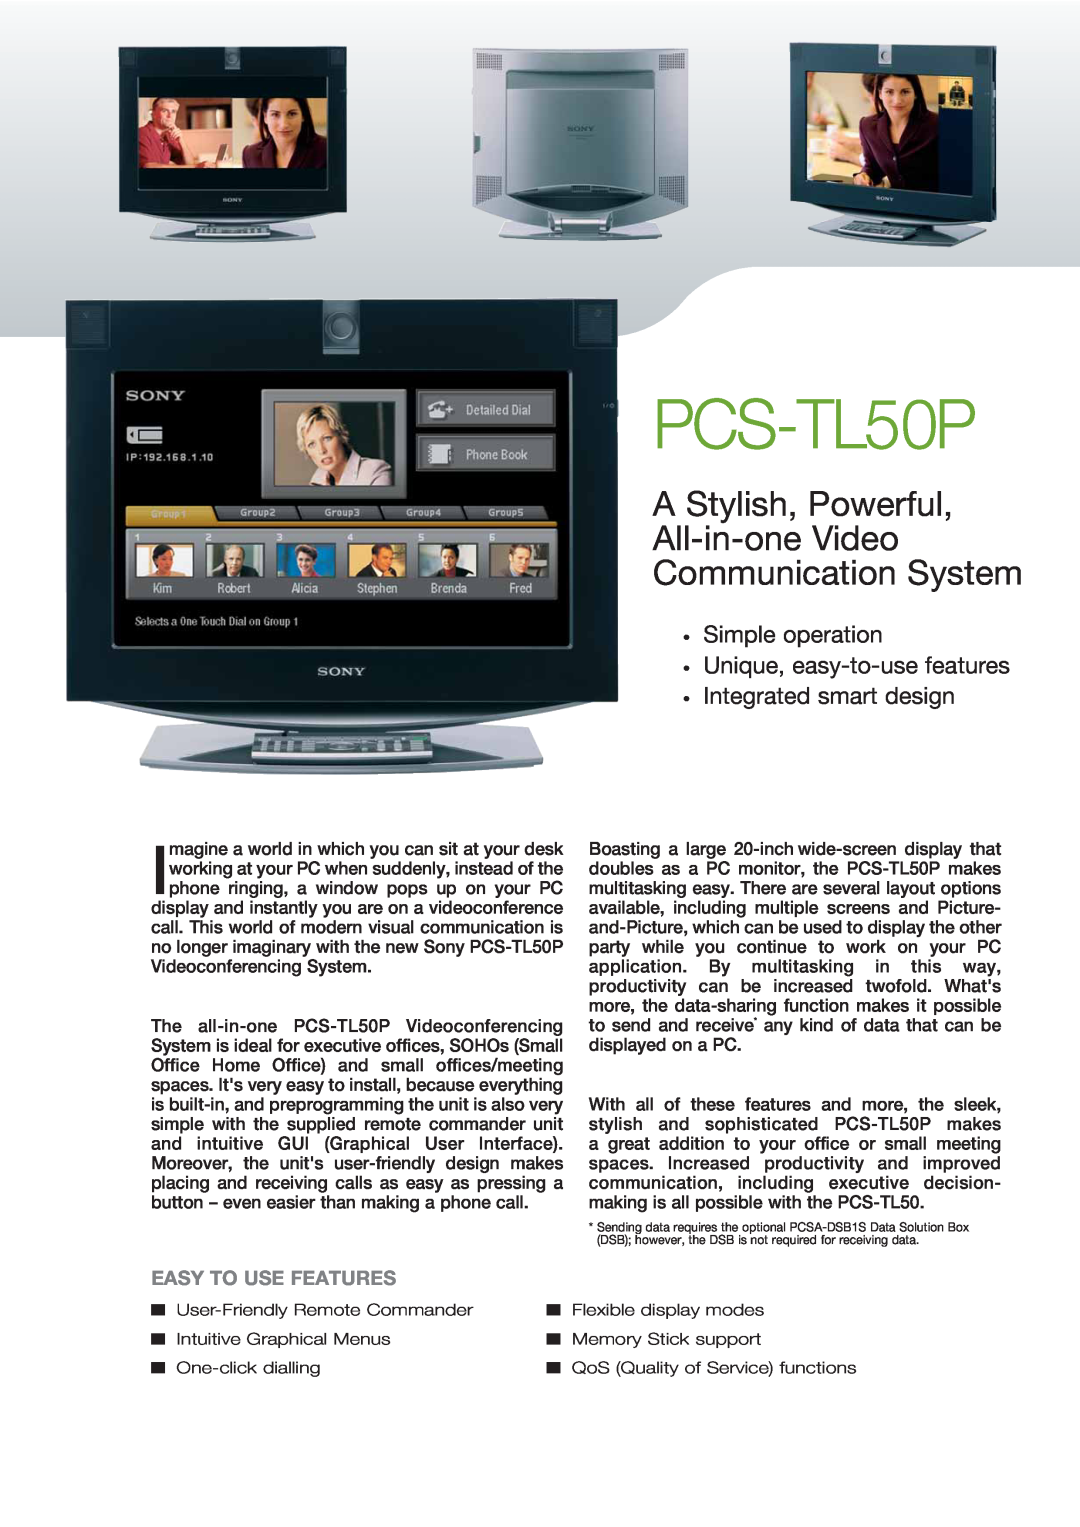 Sony PCS-TL50P manual A Stylish, Powerful All-in-one Video Communication System, Easy To Use Features 